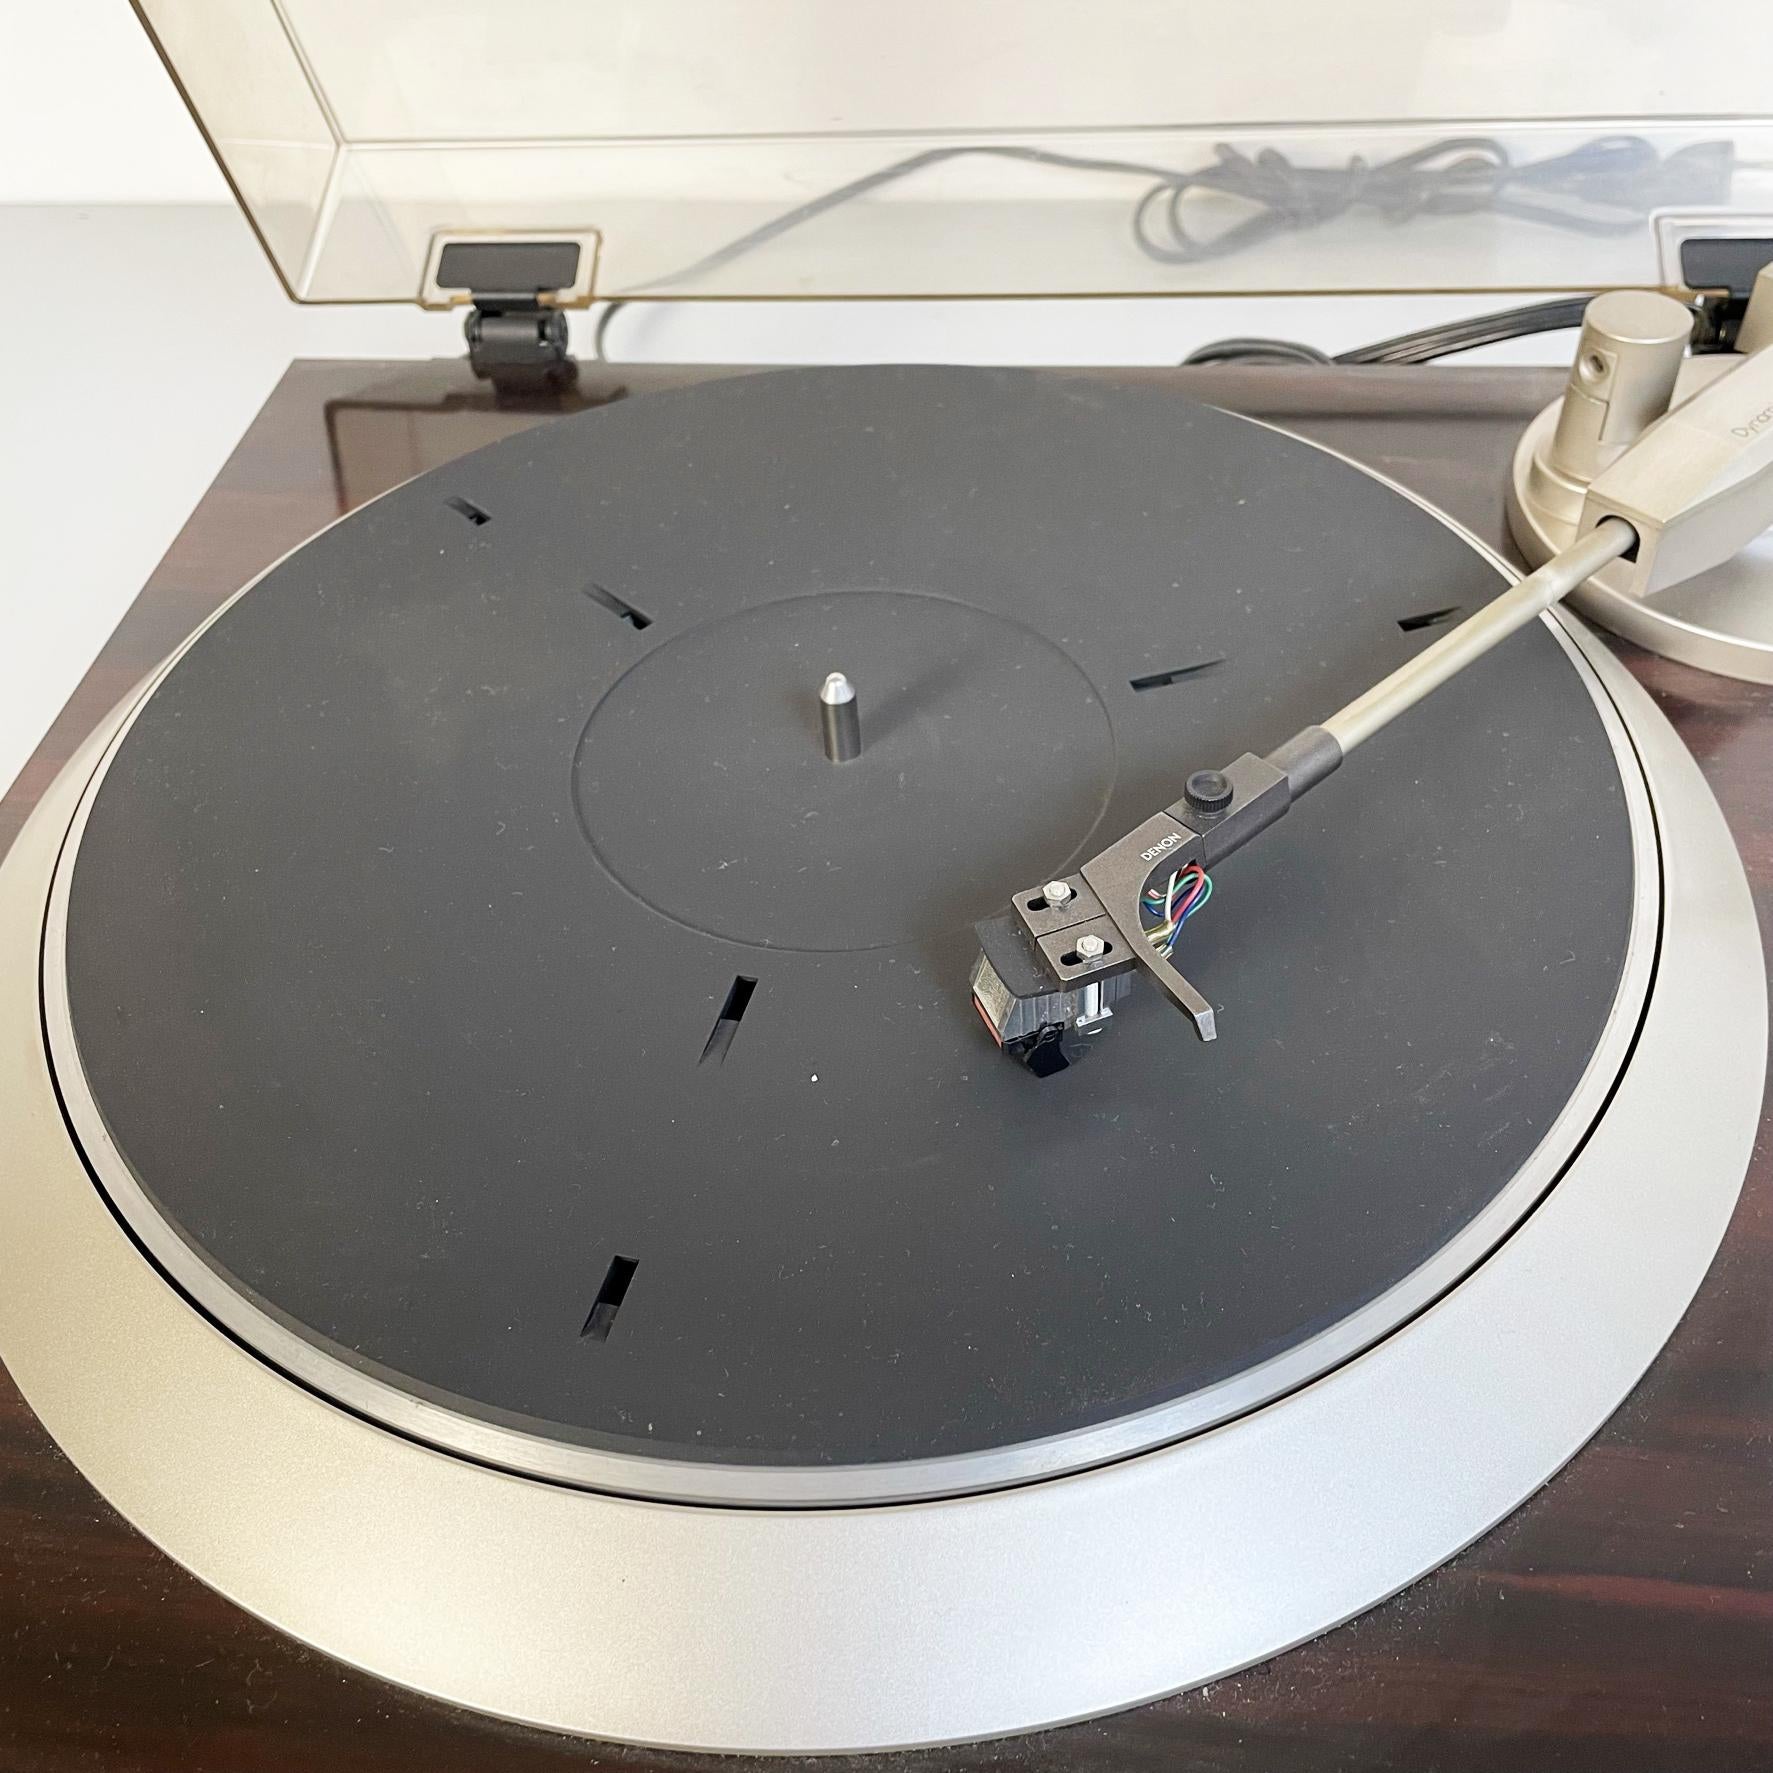 Aluminum Japanese Mid-Century Modern Direct Drive Turntable by Denon Marke, 1980s